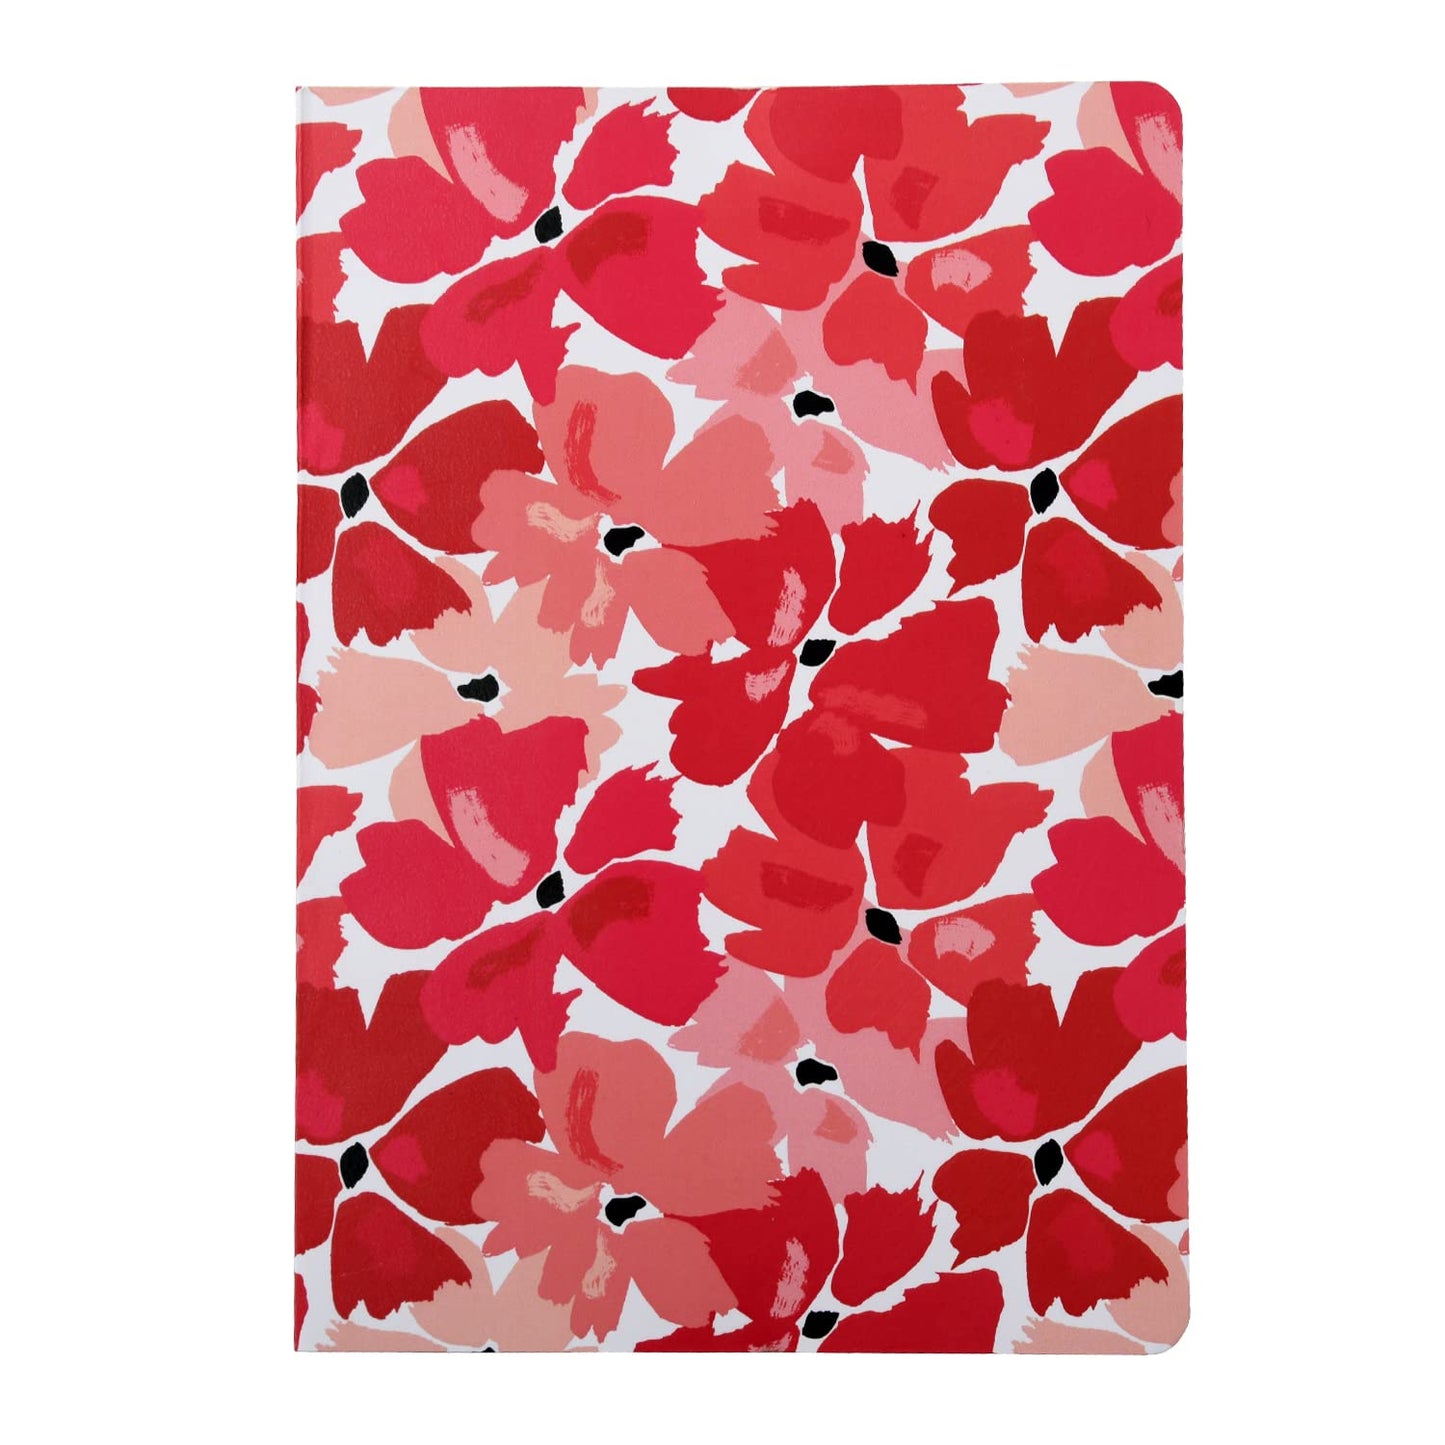 Abstract & Floral - Set of 8 Notebooks